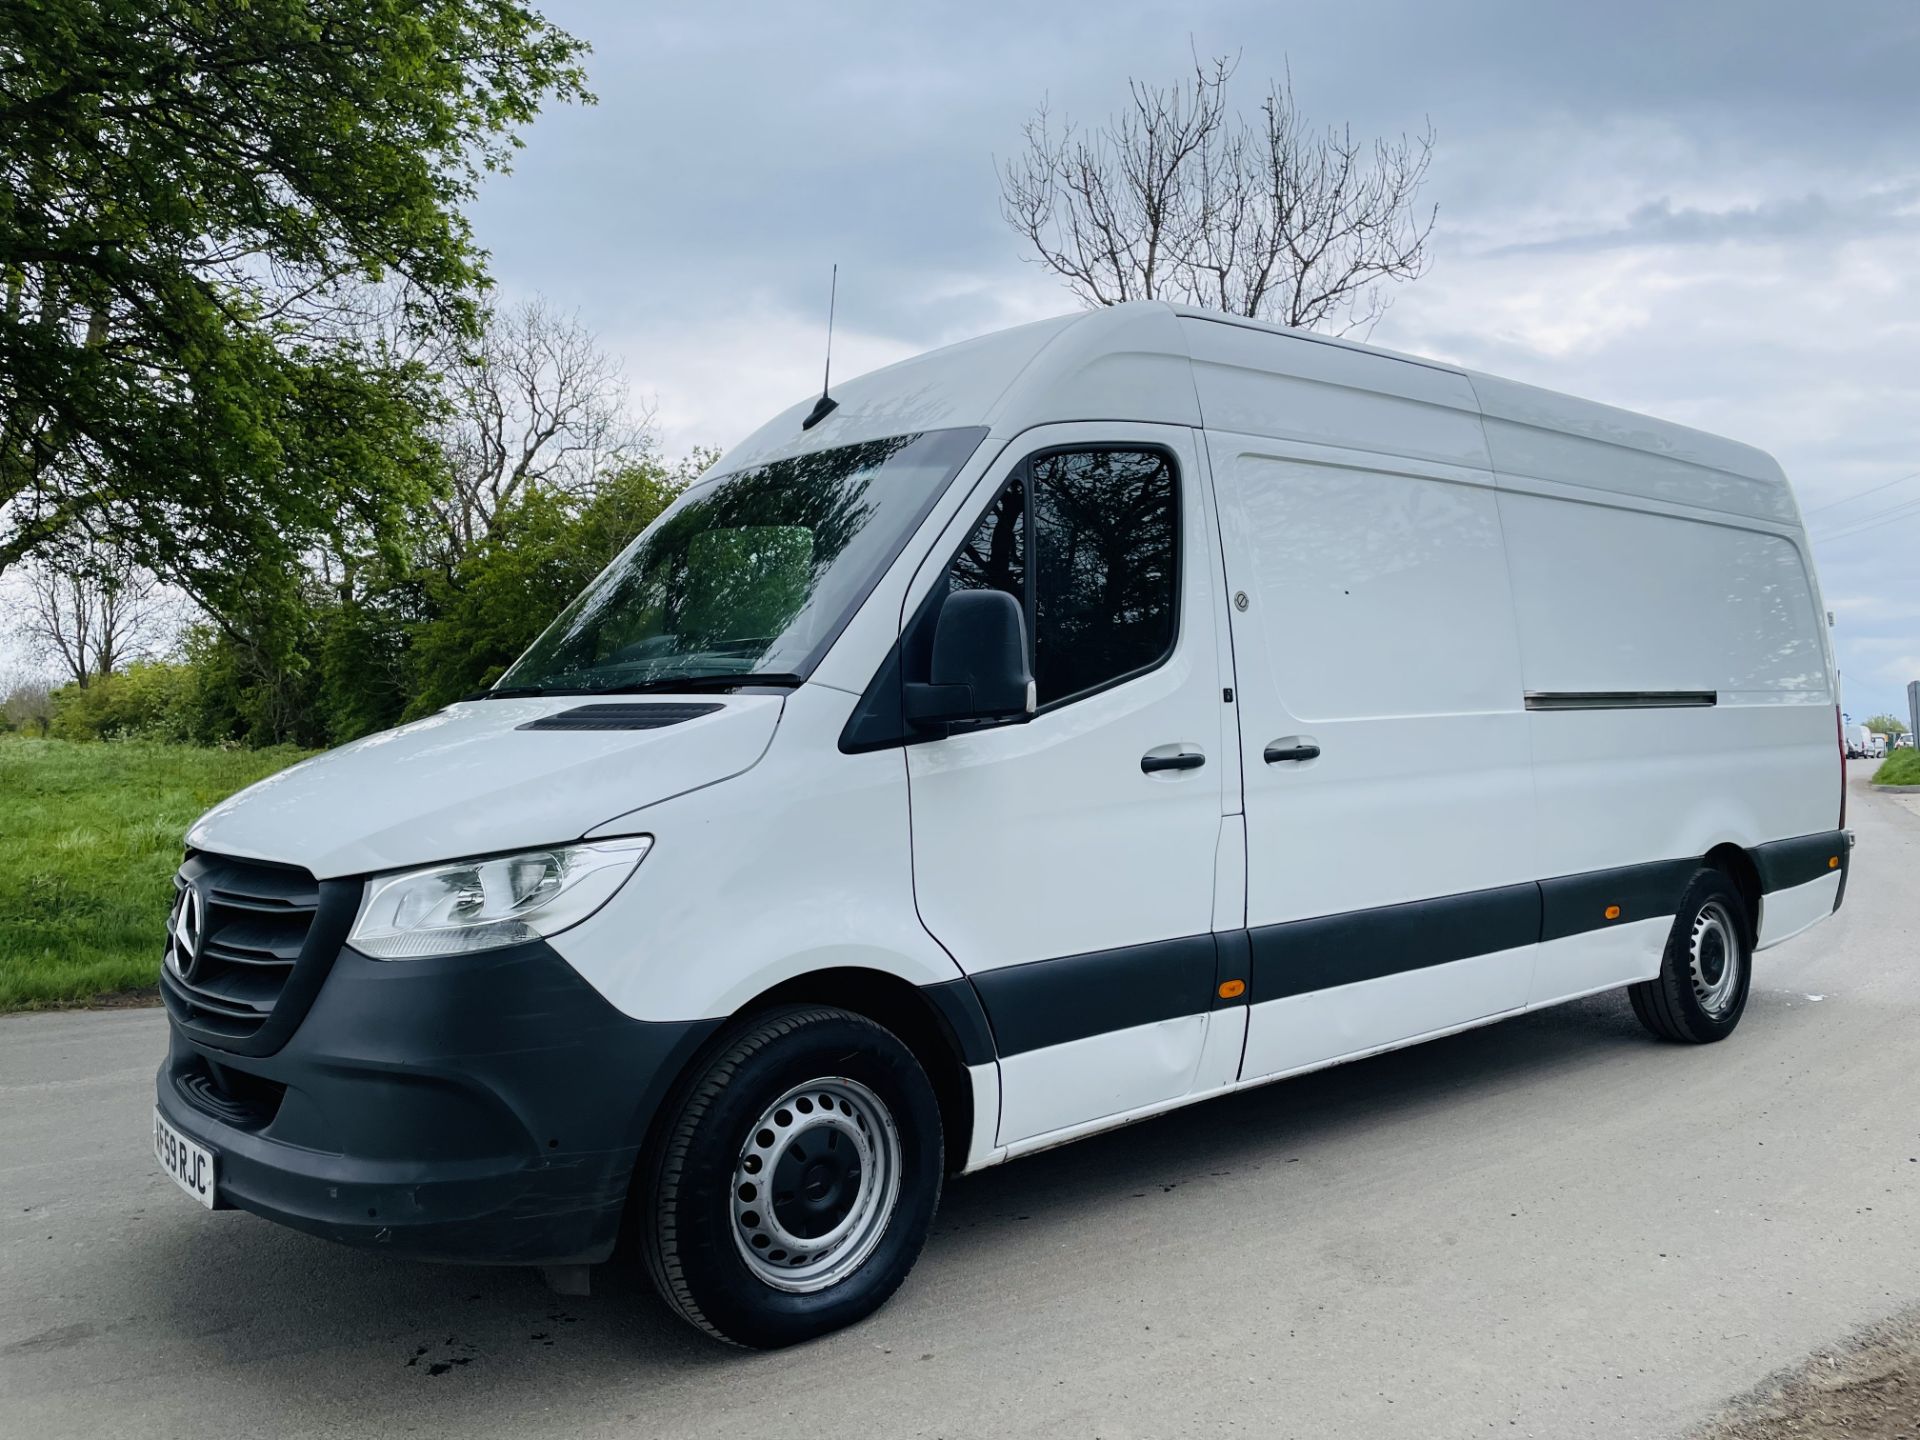 (ON SALE) MERCEDES SPRINTER 314CDI "LWB" HIGH ROOF (19 REG) EURO 6 - ONLY 83K MILES - CRUISE CONTROL - Image 8 of 17